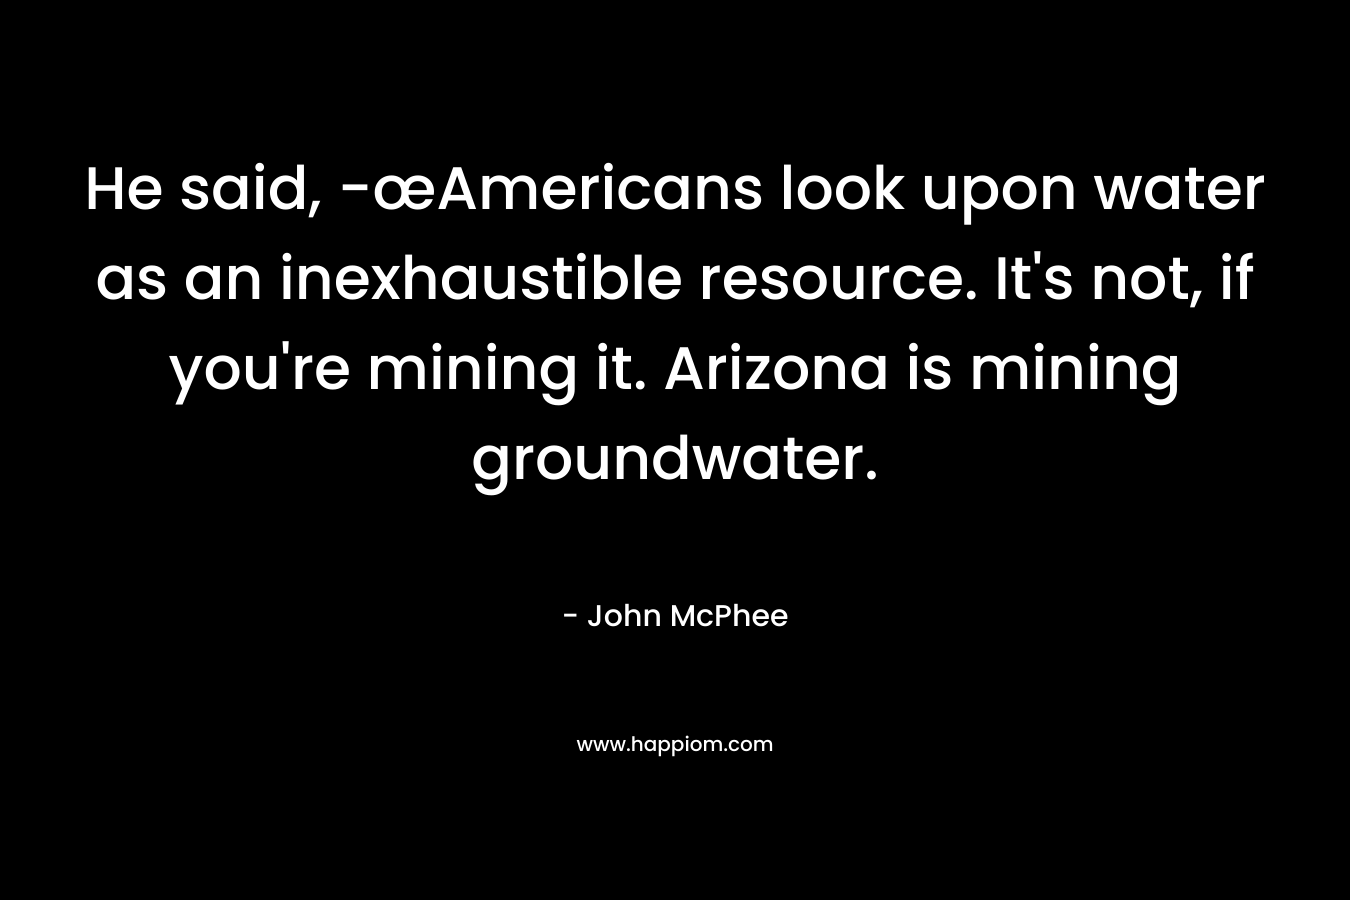 He said, -œAmericans look upon water as an inexhaustible resource. It’s not, if you’re mining it. Arizona is mining groundwater. – John McPhee